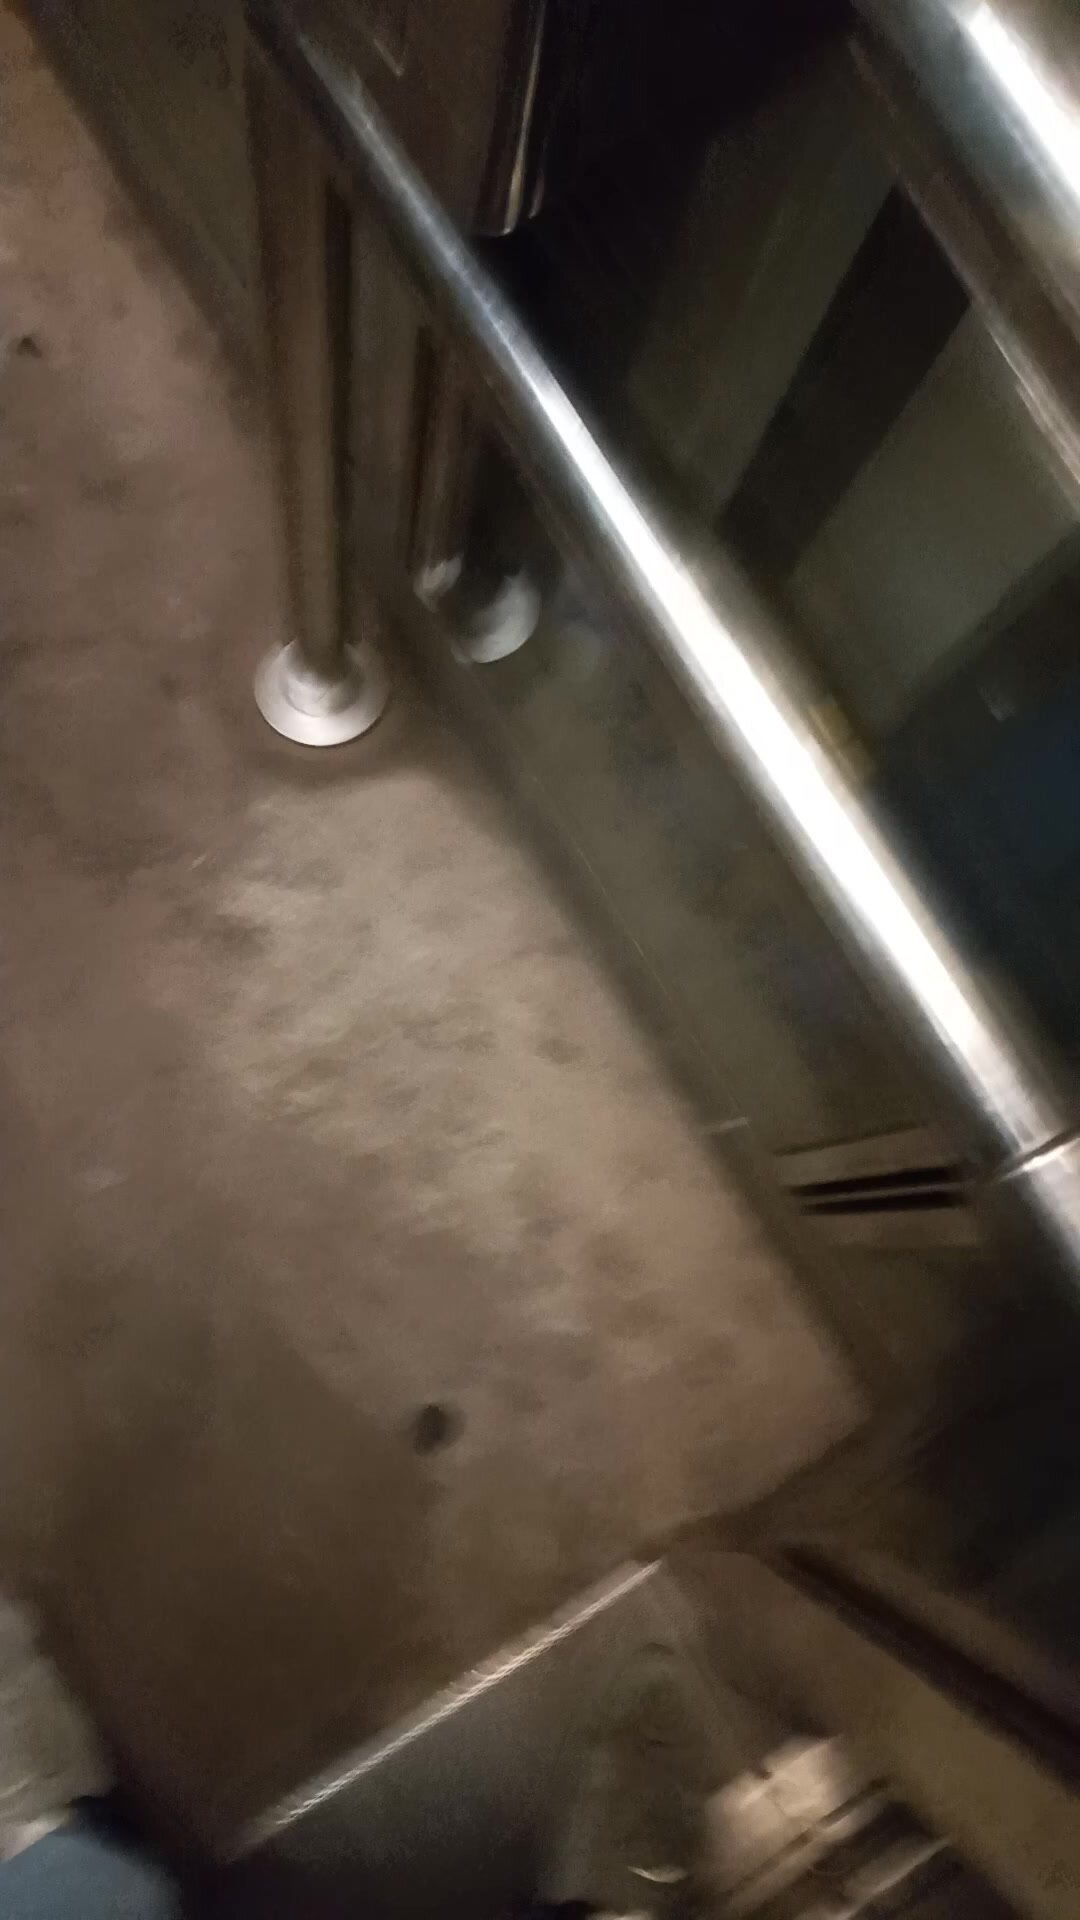 adding piss in to elevator